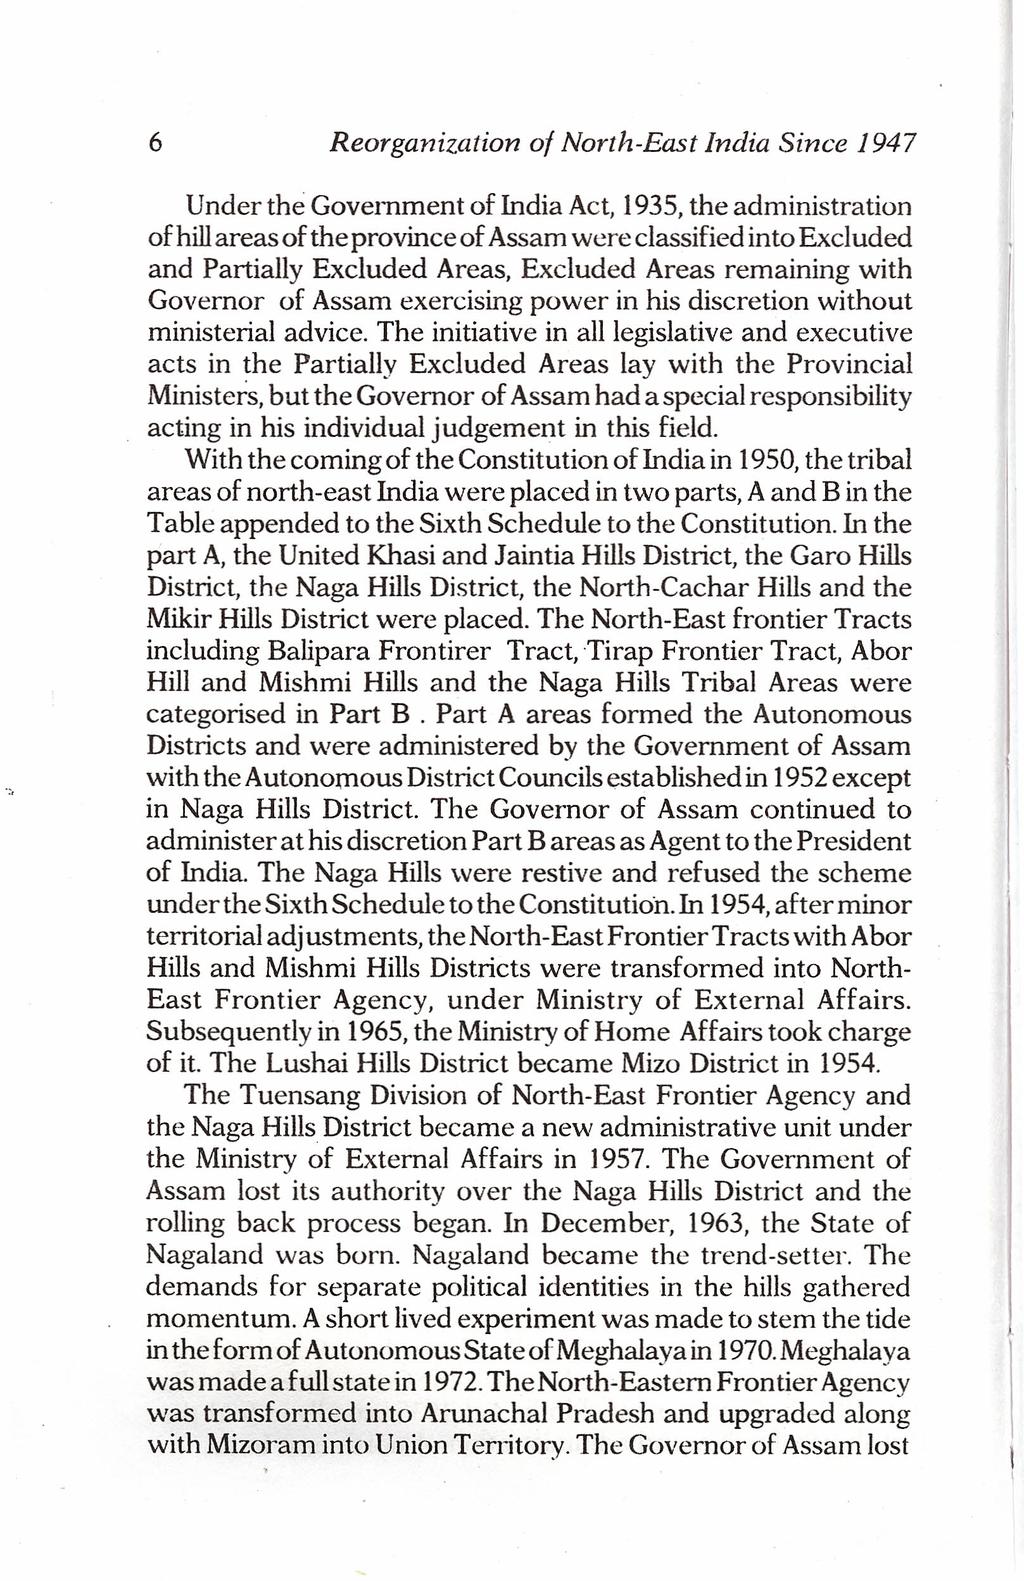 6 Reorganization of North-East India Since 1947 Under the Government of India Act, 1935, the administration of hill areas of the province of Assam were classified into Excluded and Partially Excluded